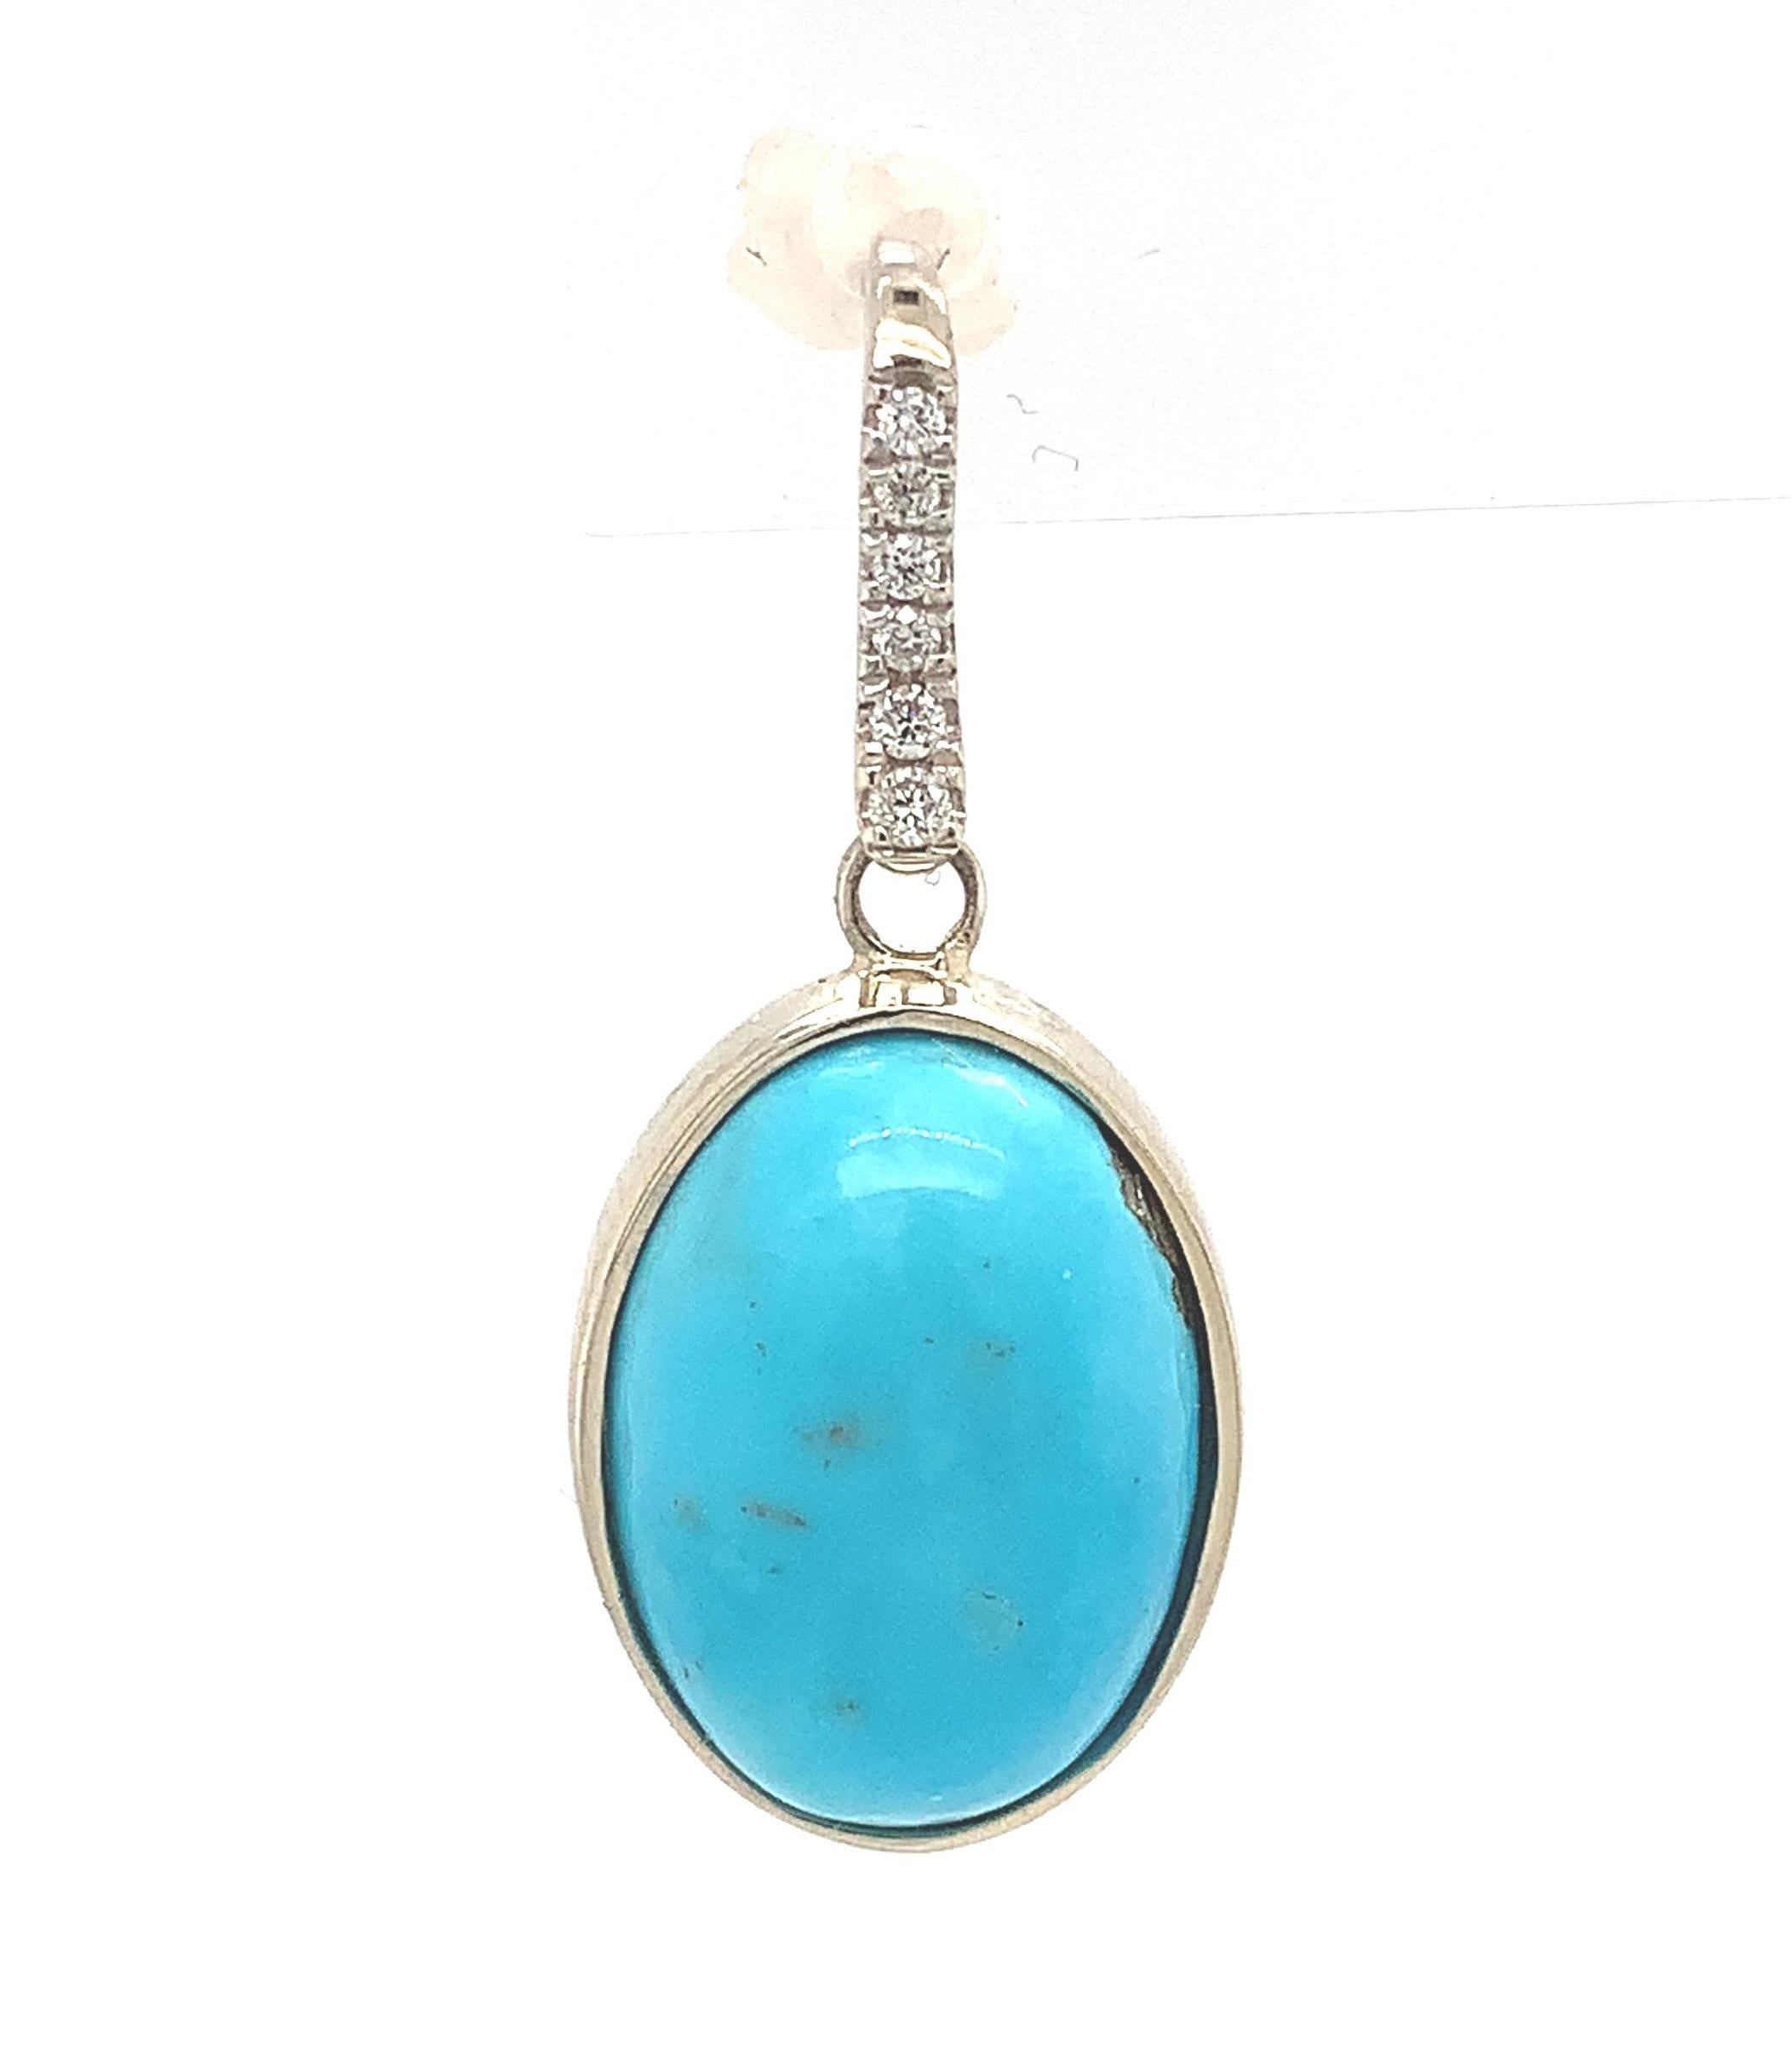 
 14K white gold pair of turquoise and diamond drop earrings with wire hooks. This is Kingman turquoise from Arizona, which is the last full-time production mine in the US. The oval turquoise measures about 14mm x 10mm and weighs 9.17 carats total.